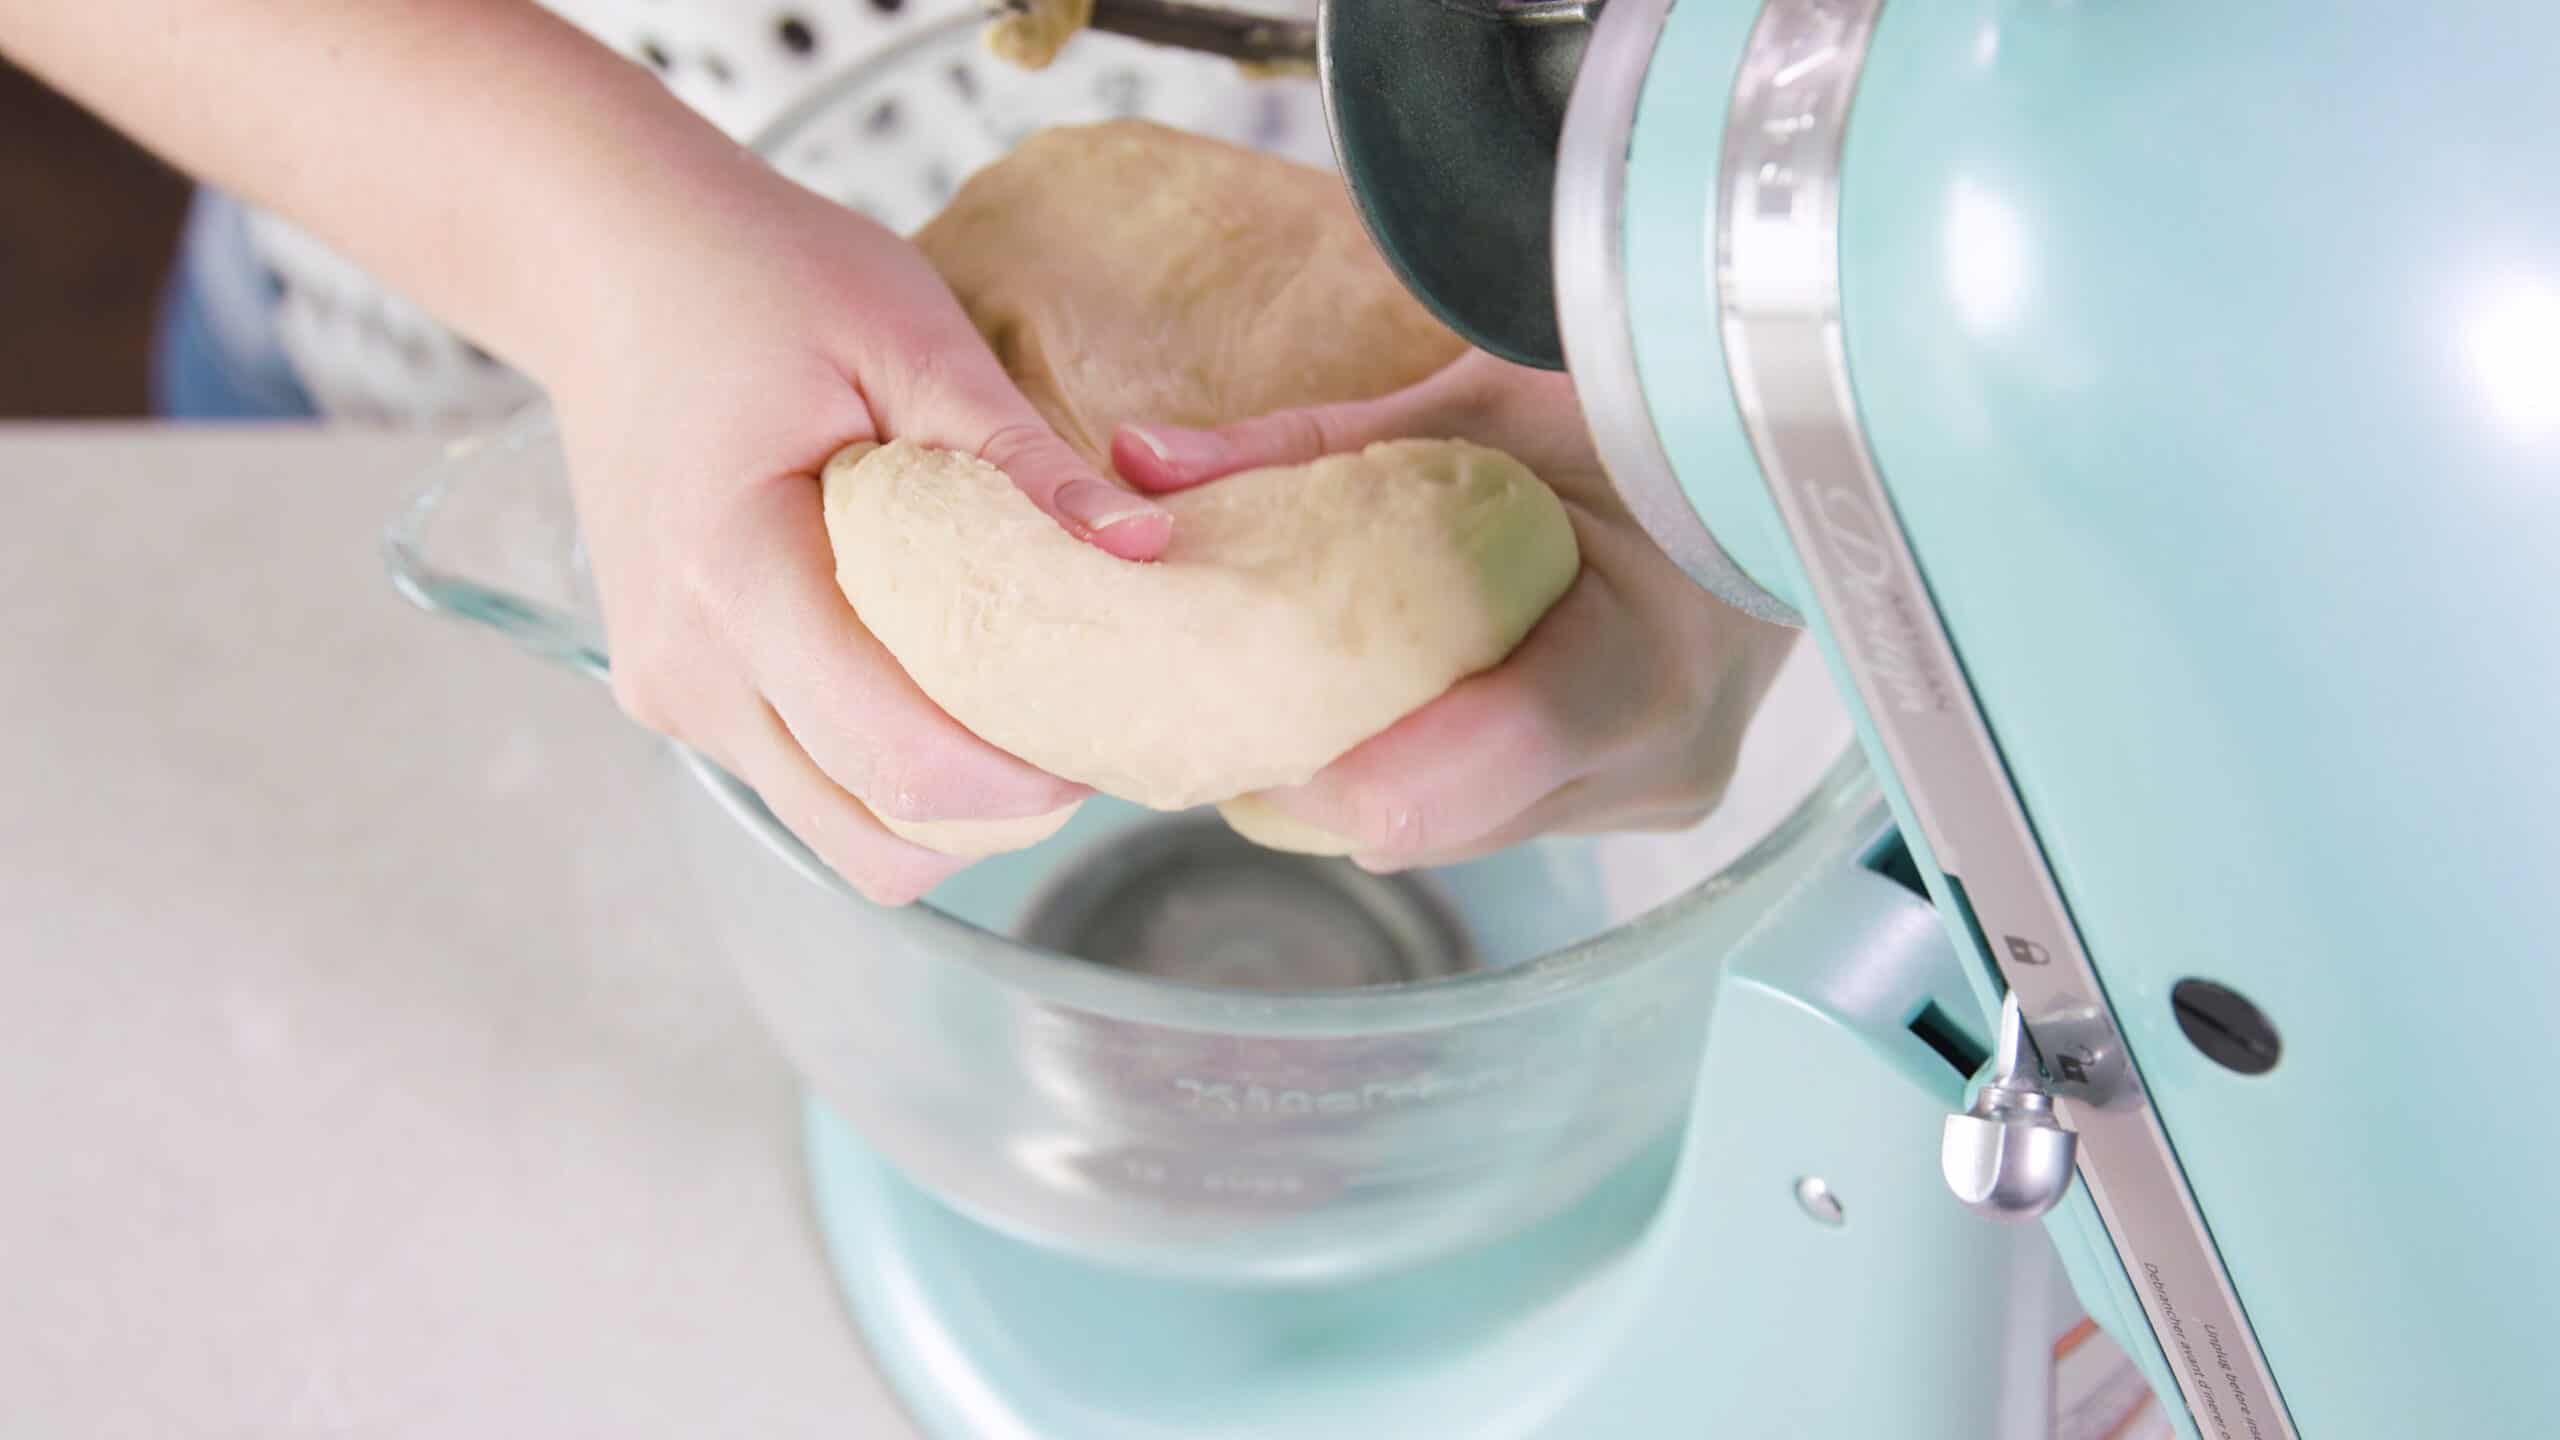 Overhead view of countertop kitchen mixer with clear glass mixing bowl and the kneaded dough held in hand to show texture.